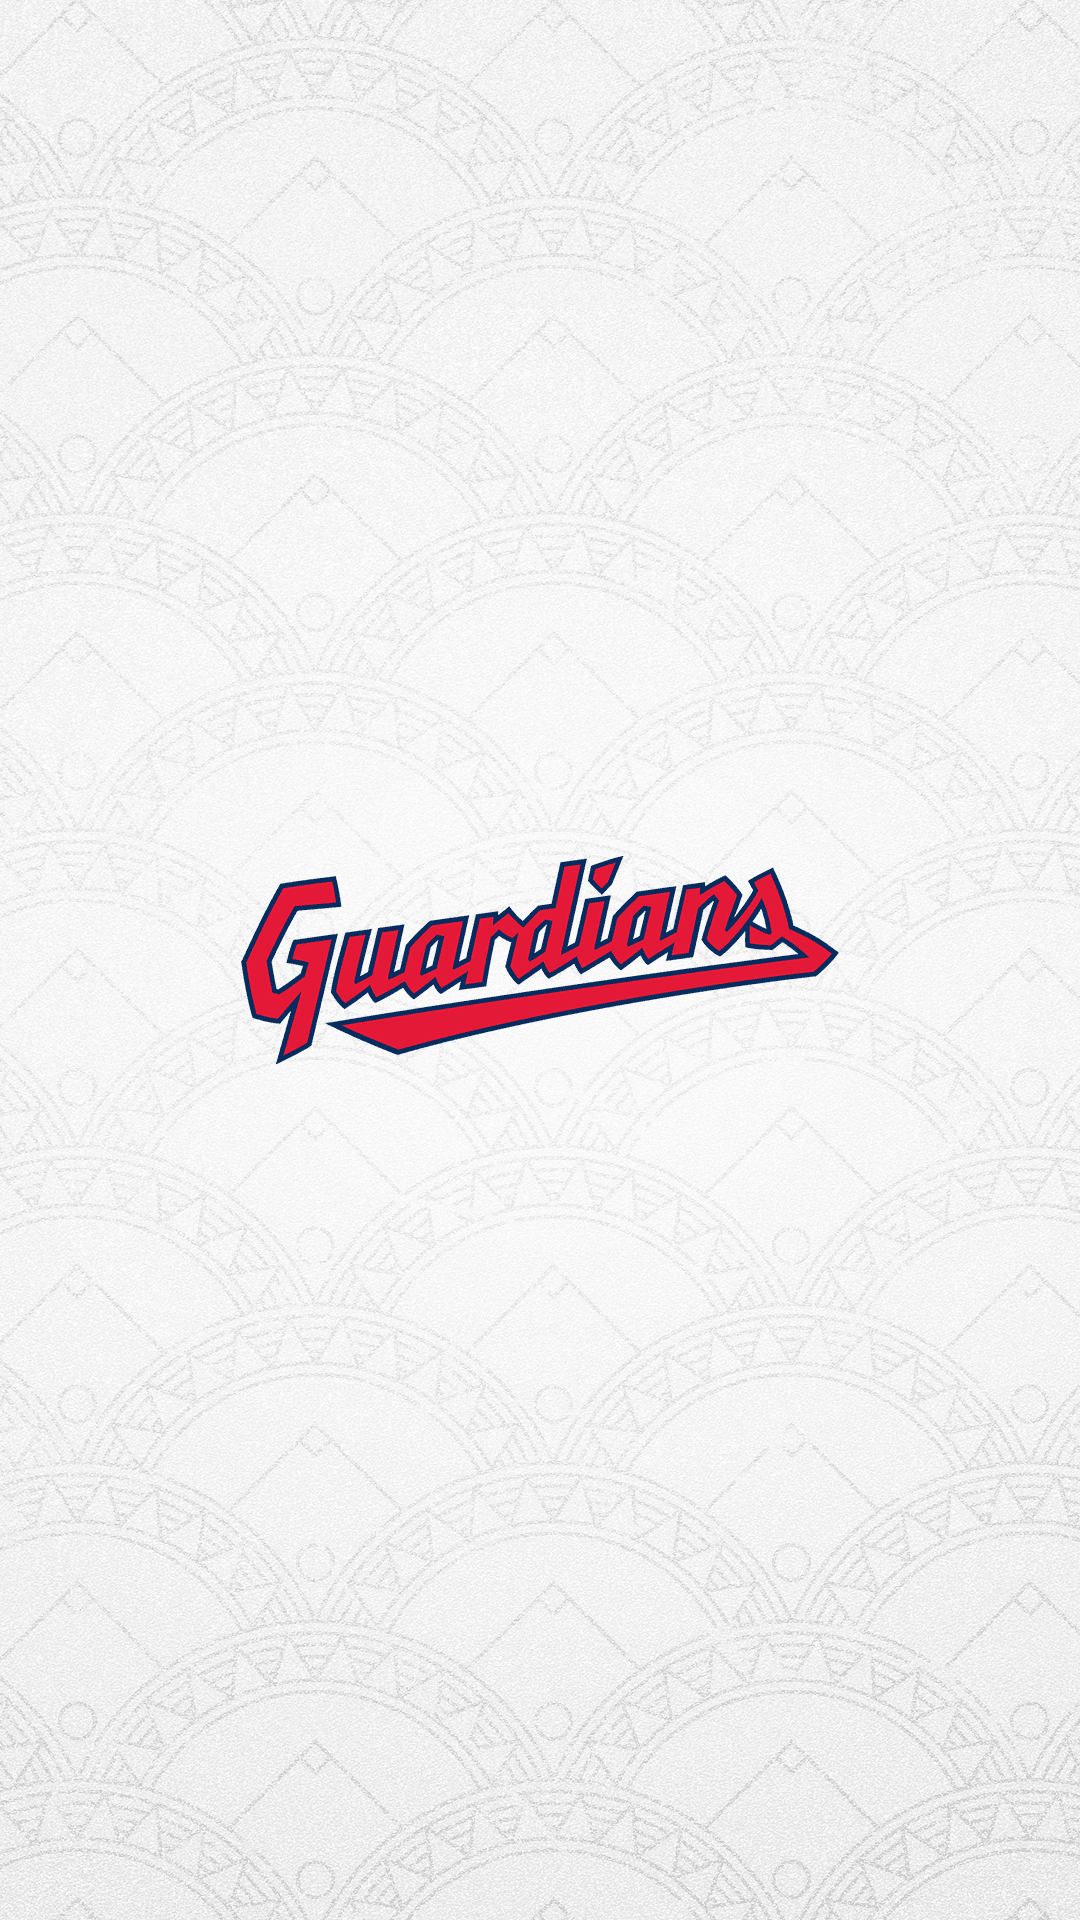 Cleveland Guardians wallpaper by DawgPound1  Download on ZEDGE  40a5